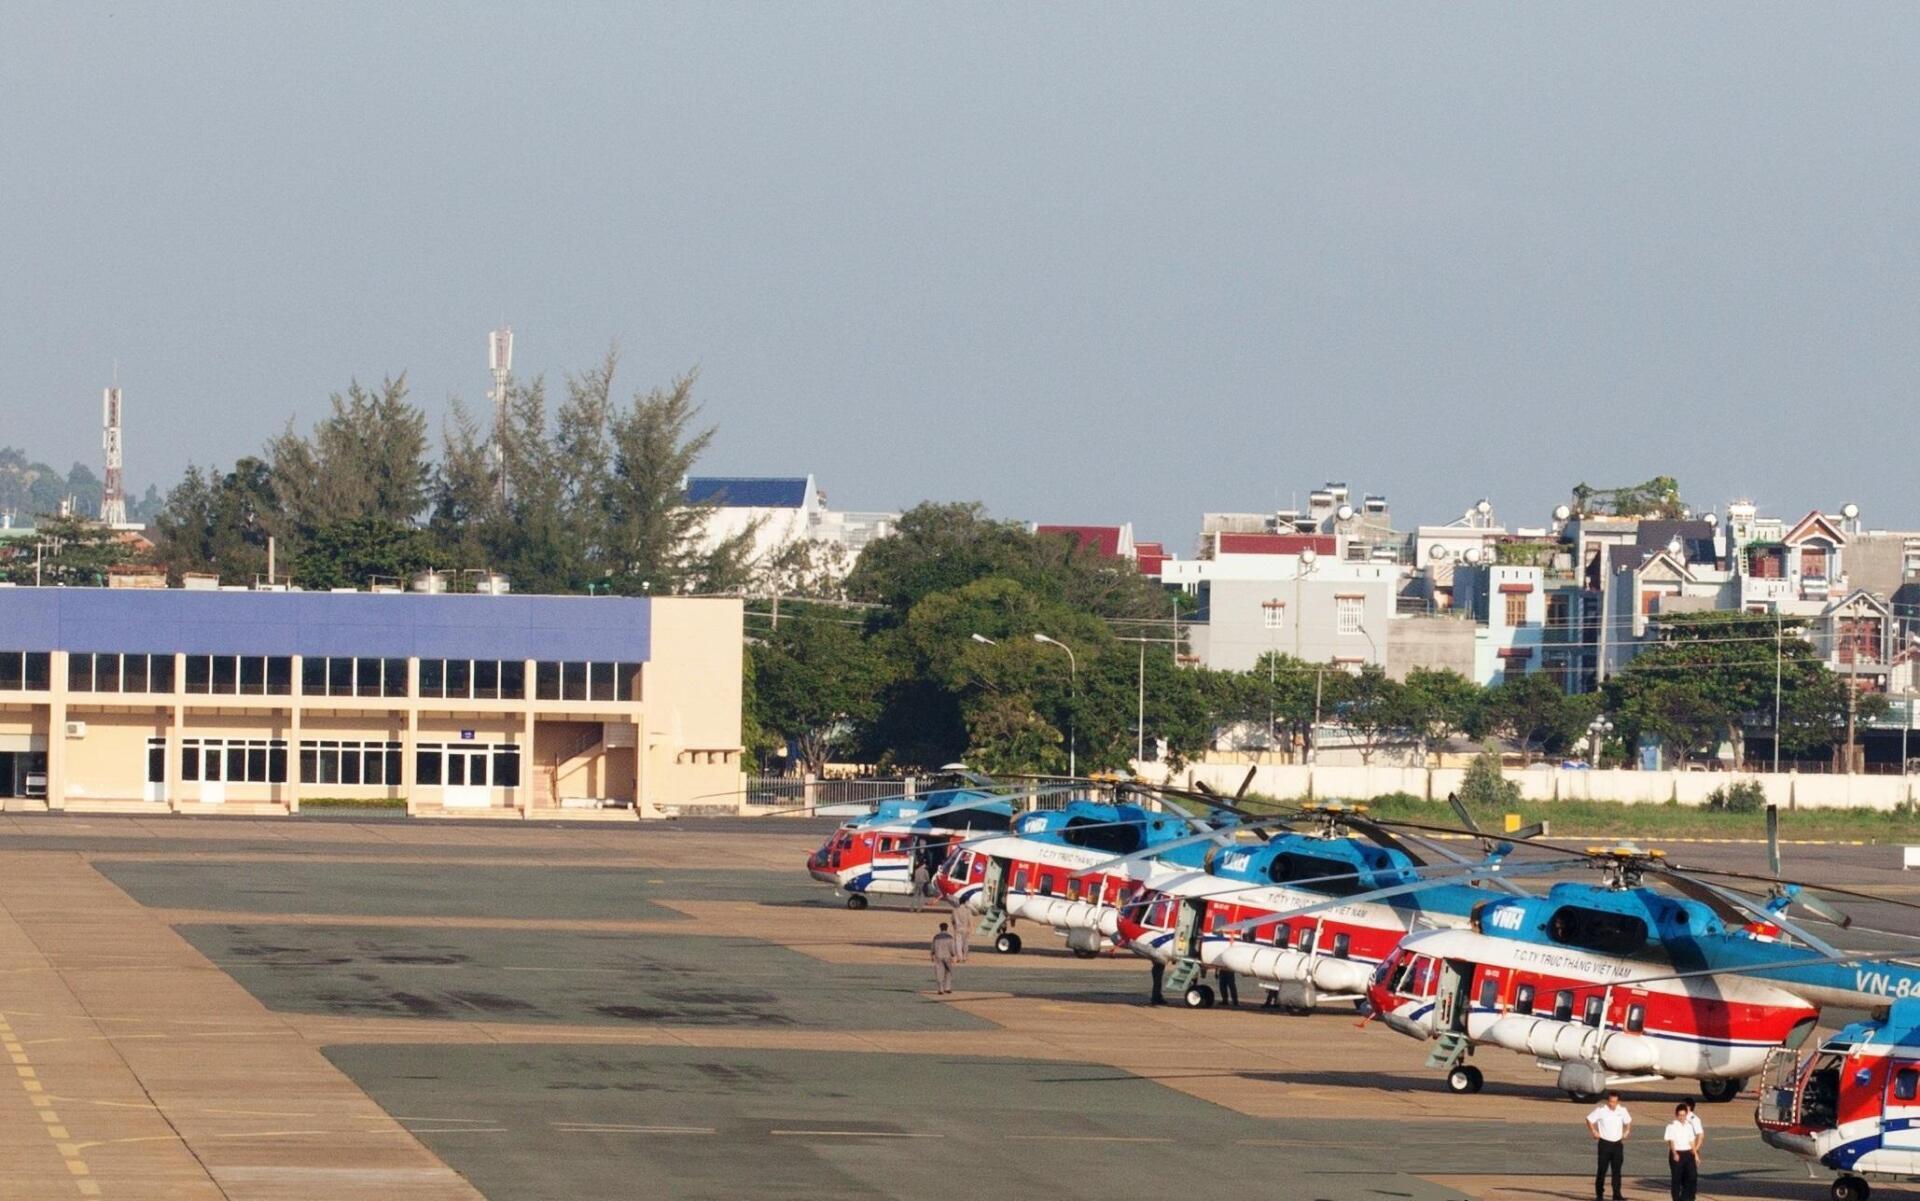 A row of helicopters are parked on a runway in front of a building.